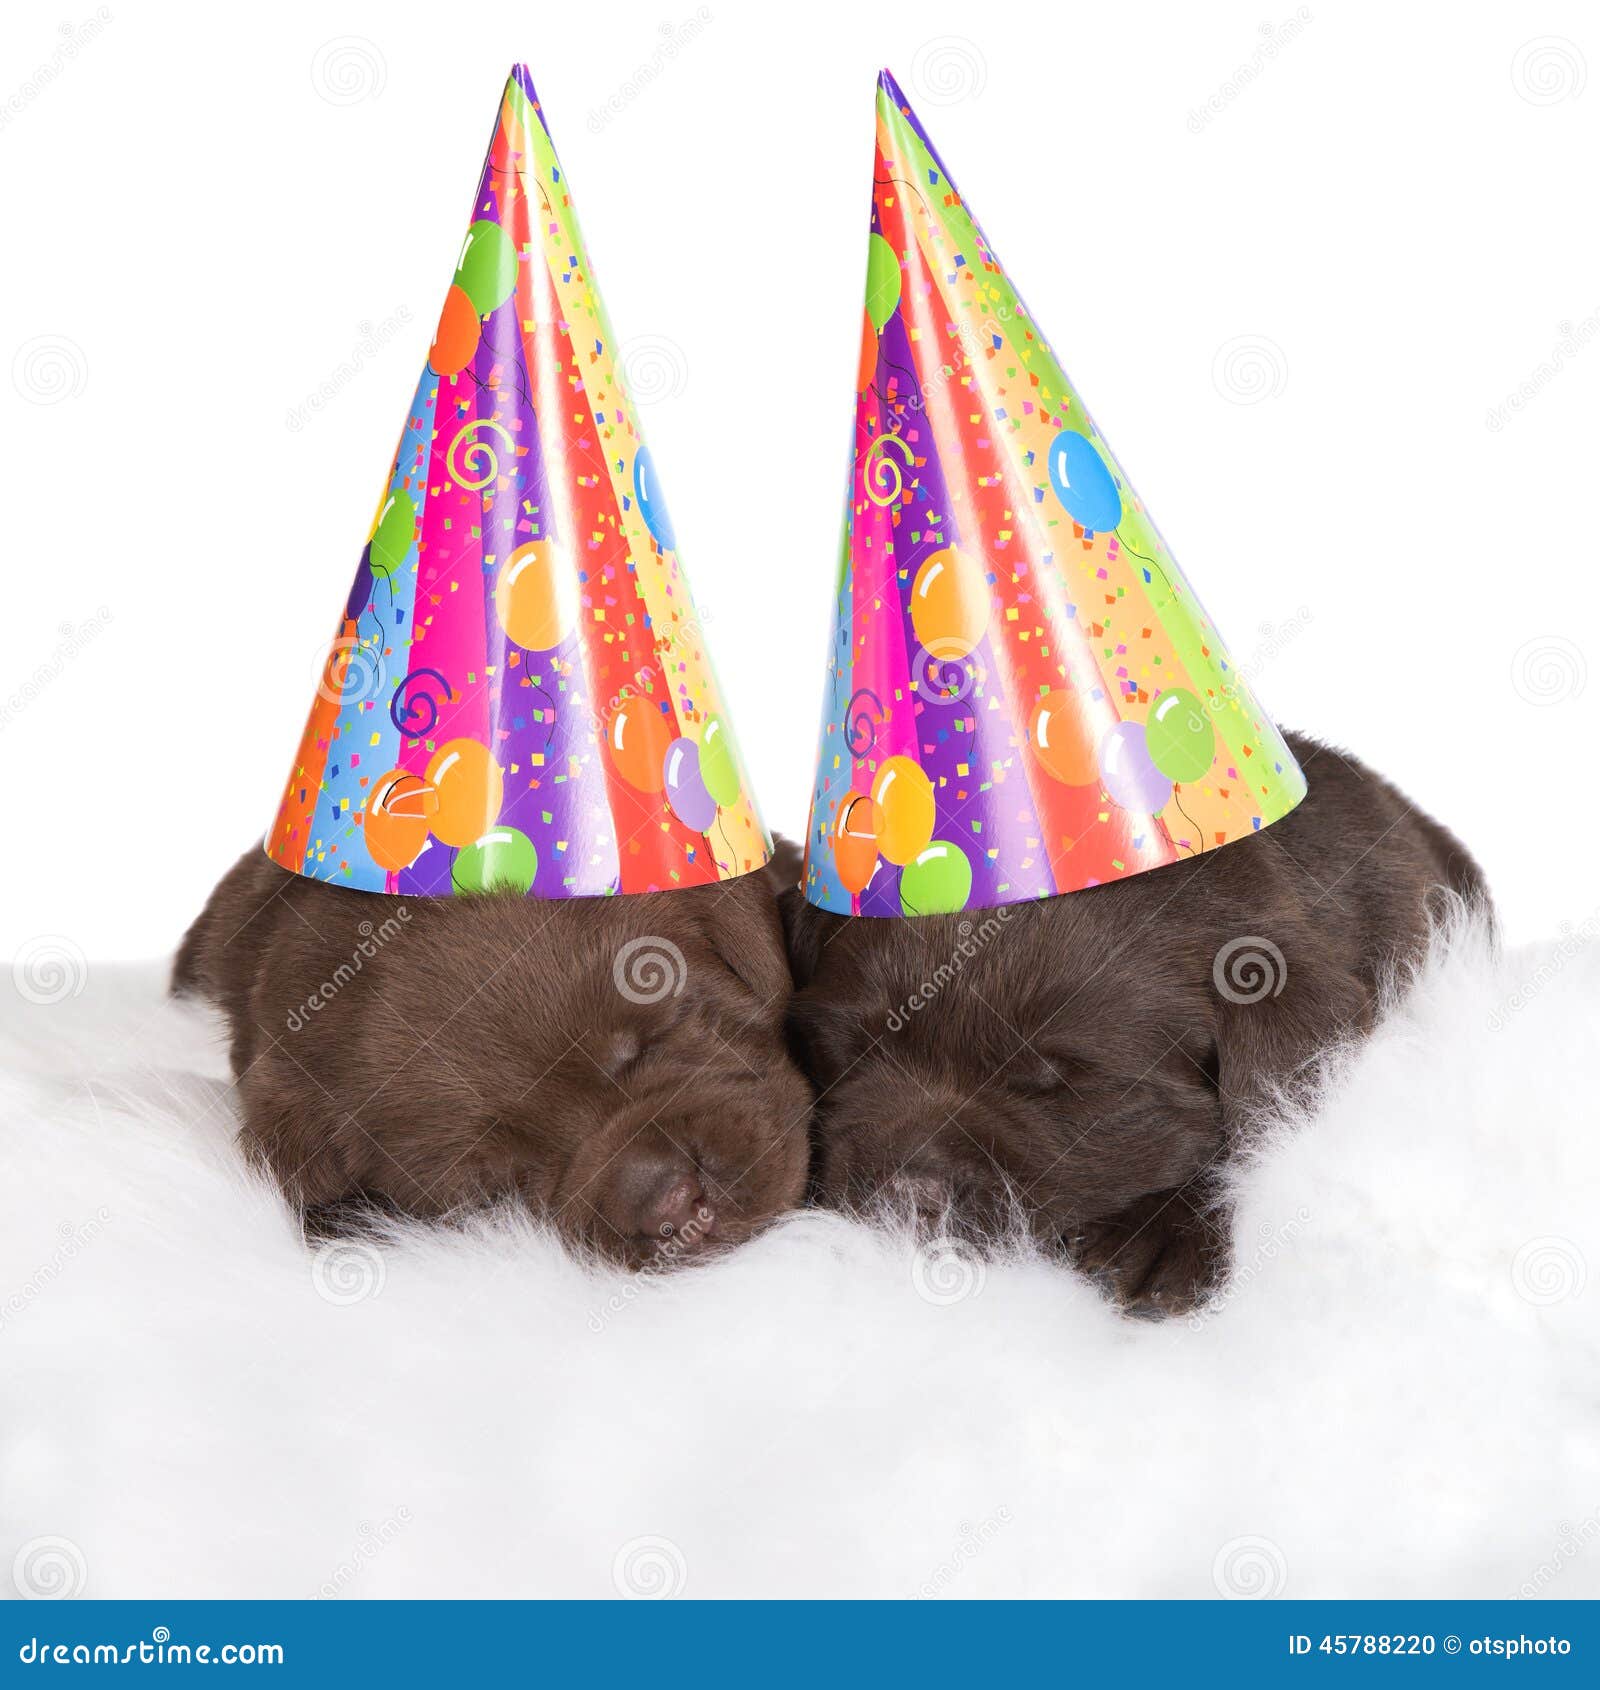 Two Brown Puppies In Party Hats Stock Photo - Image: 45788220